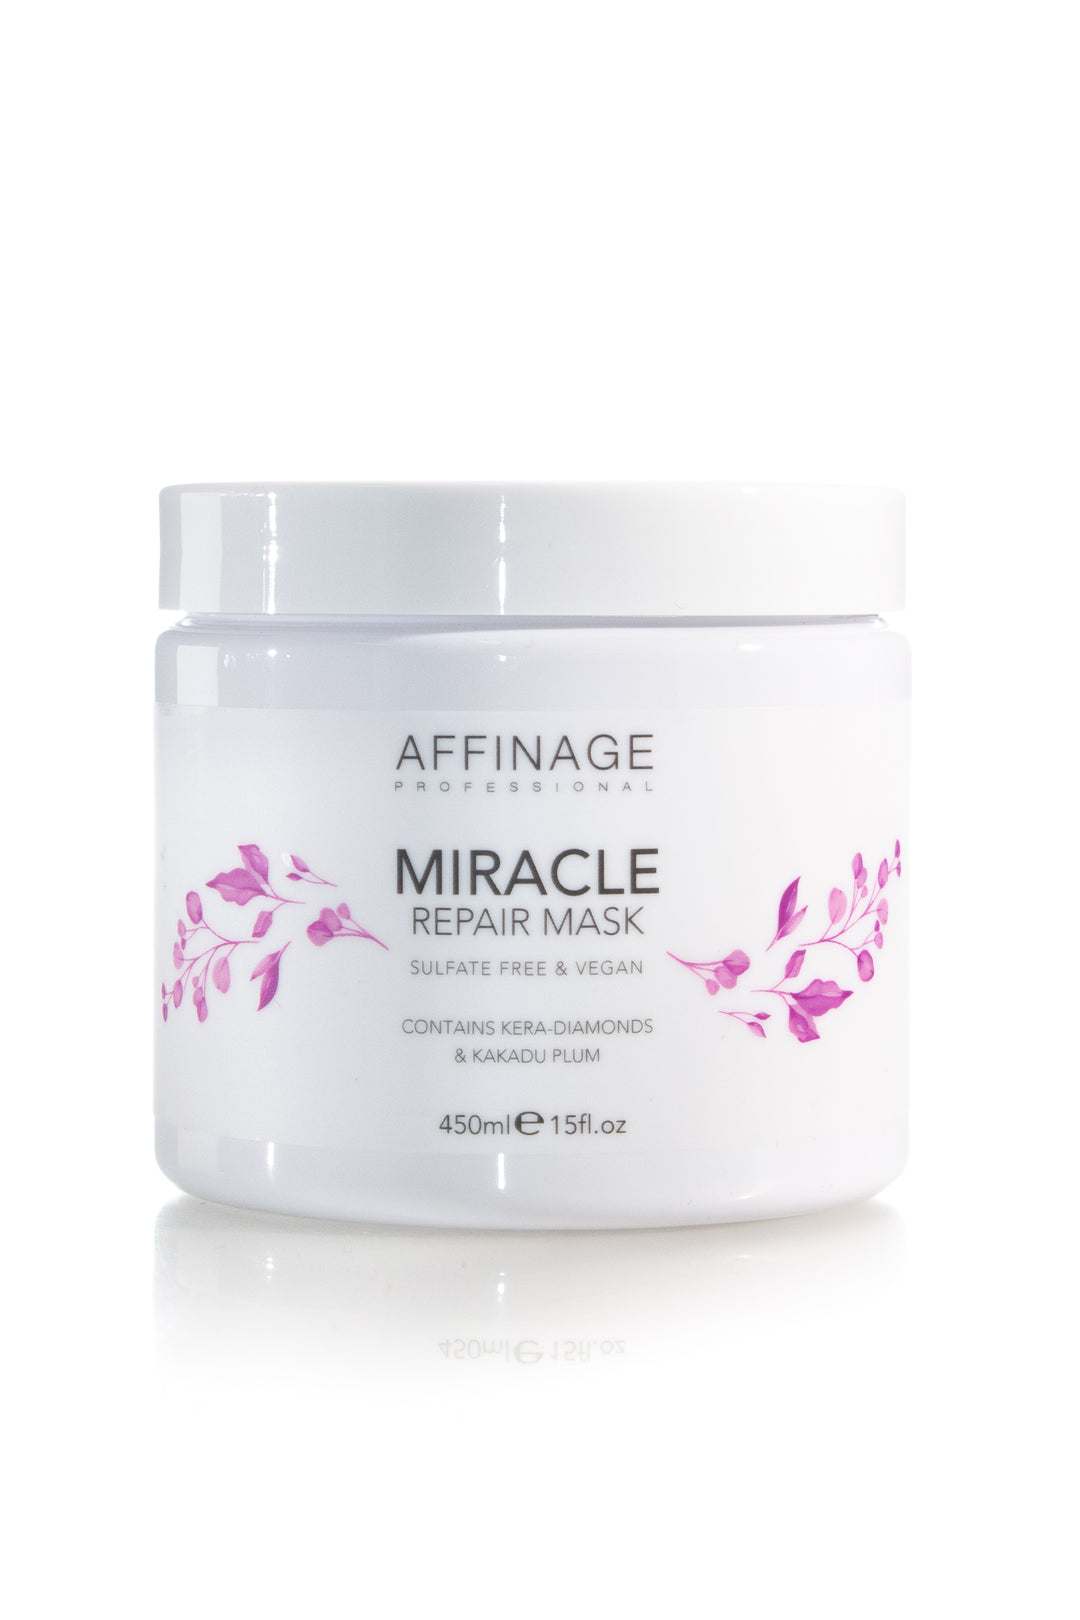 affinage-professional-miracle-repair-mask